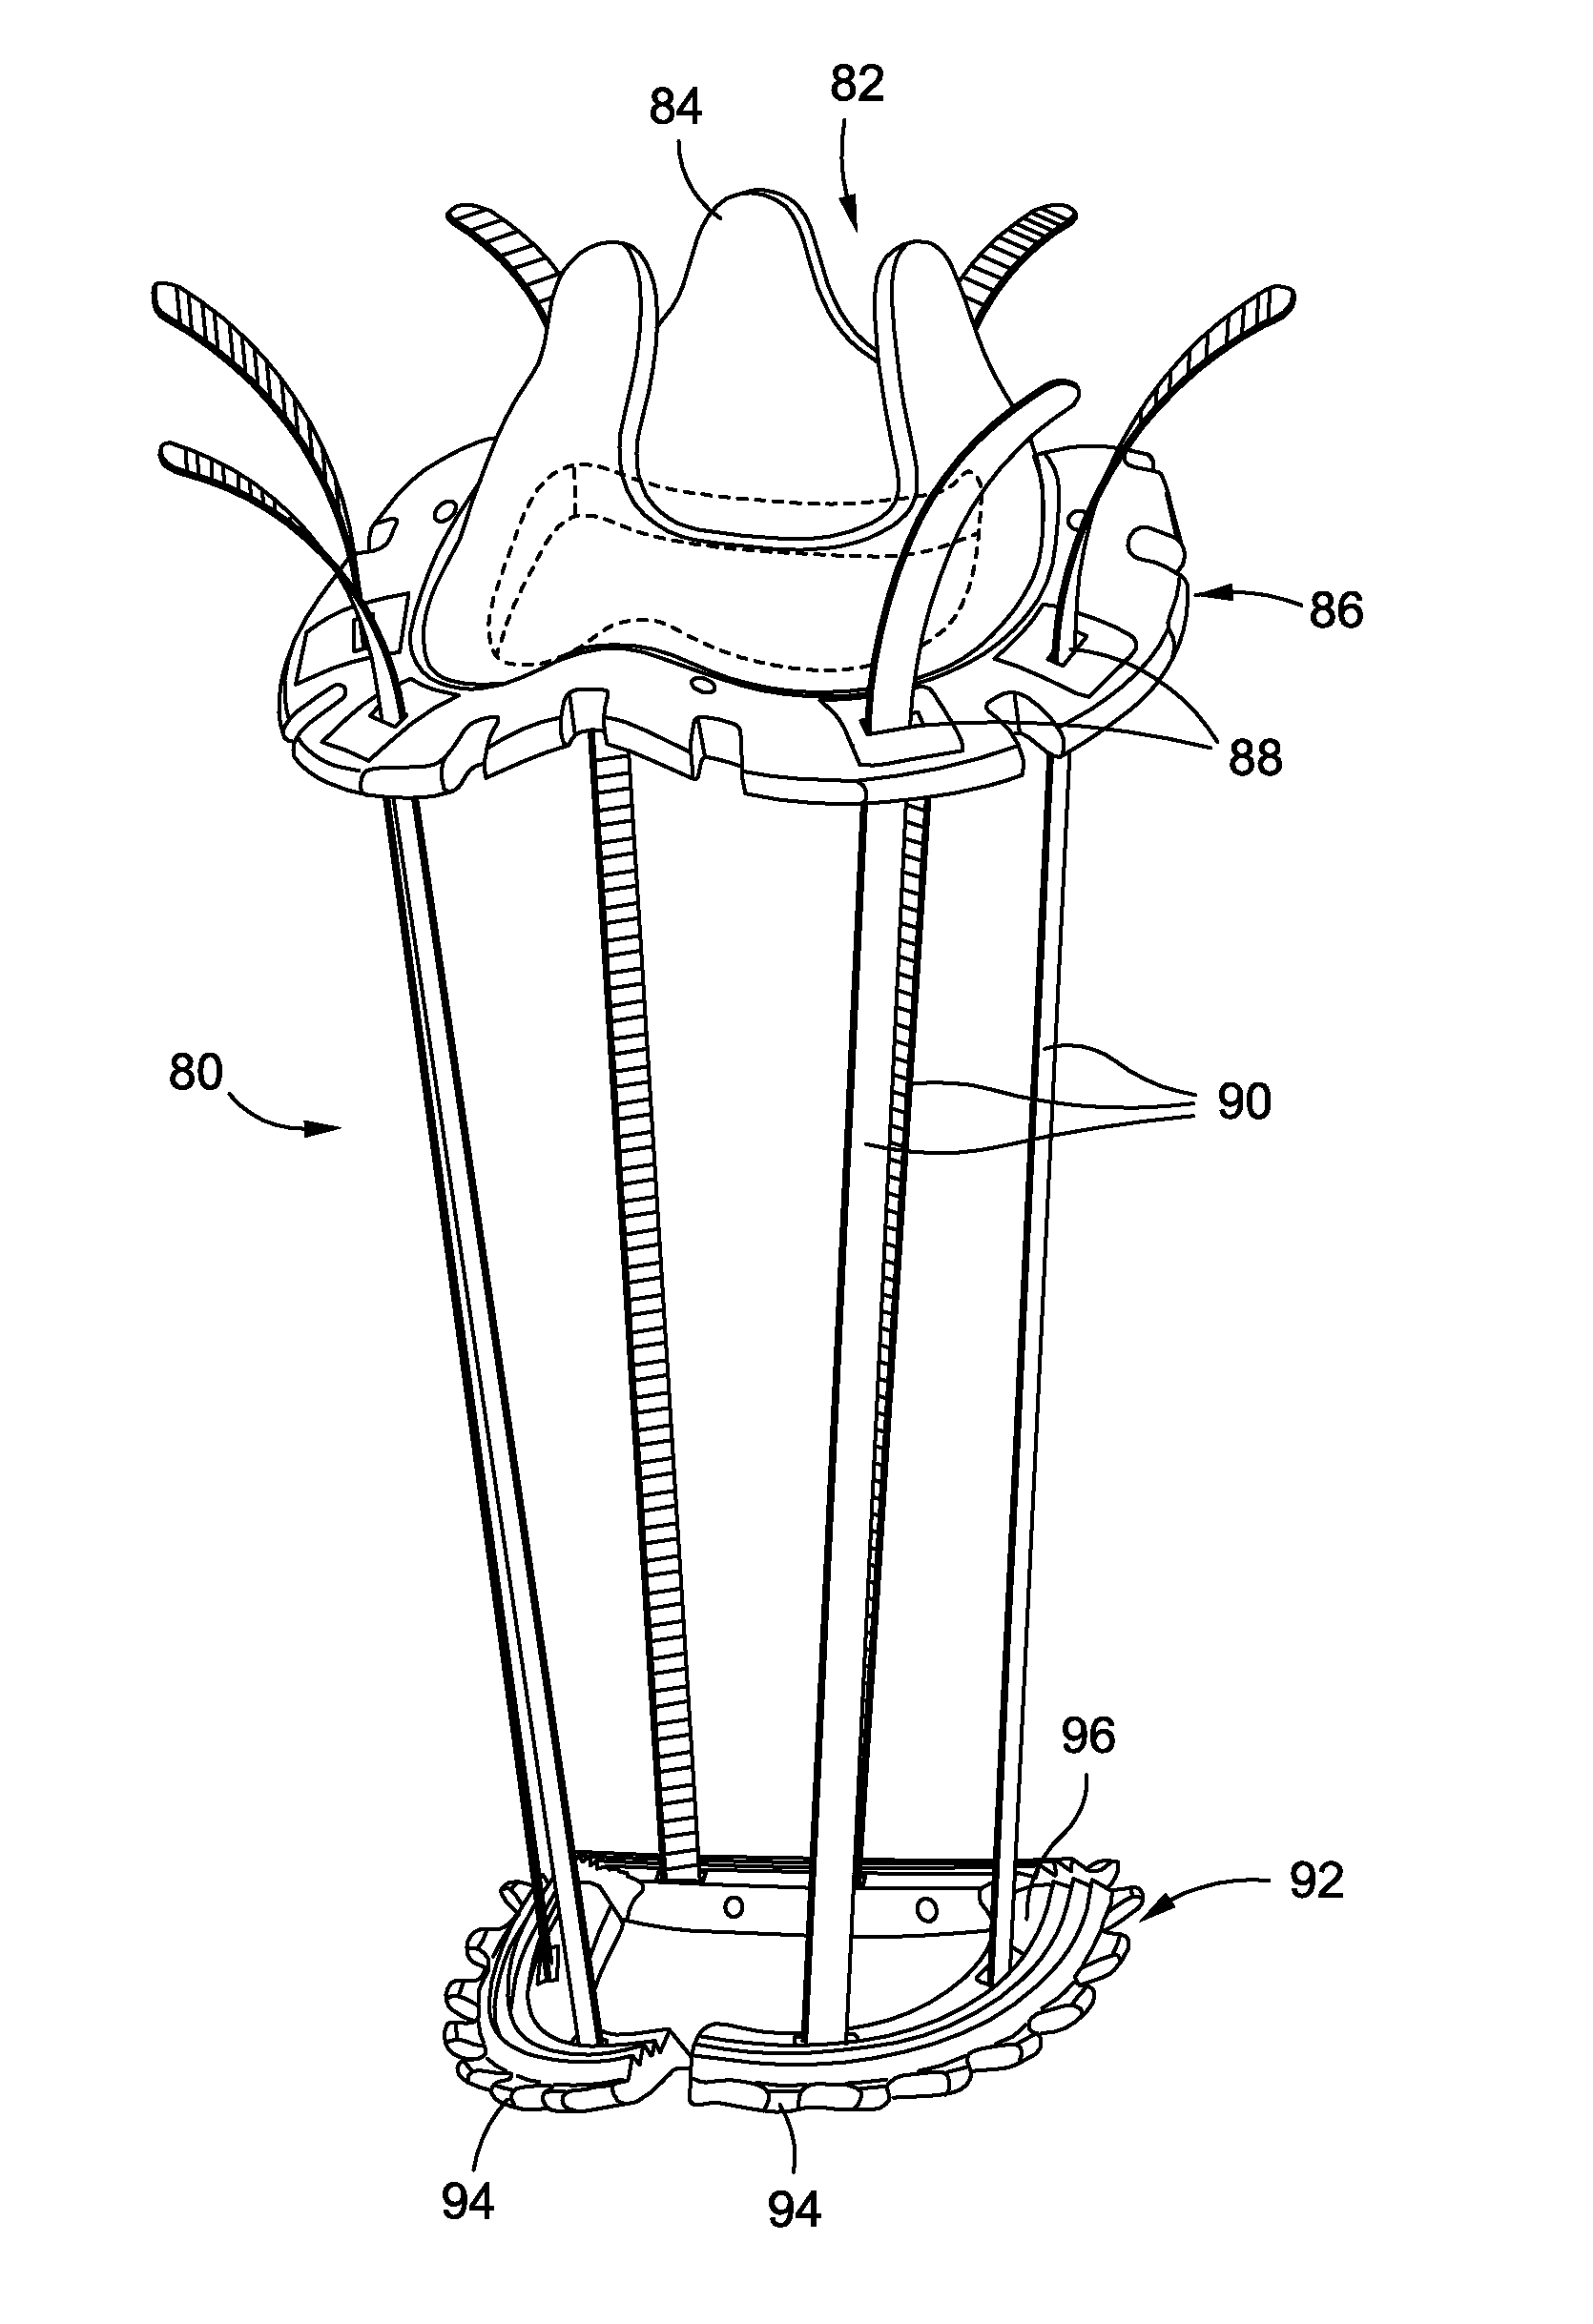 Heart valve prosthesis anchoring device and methods